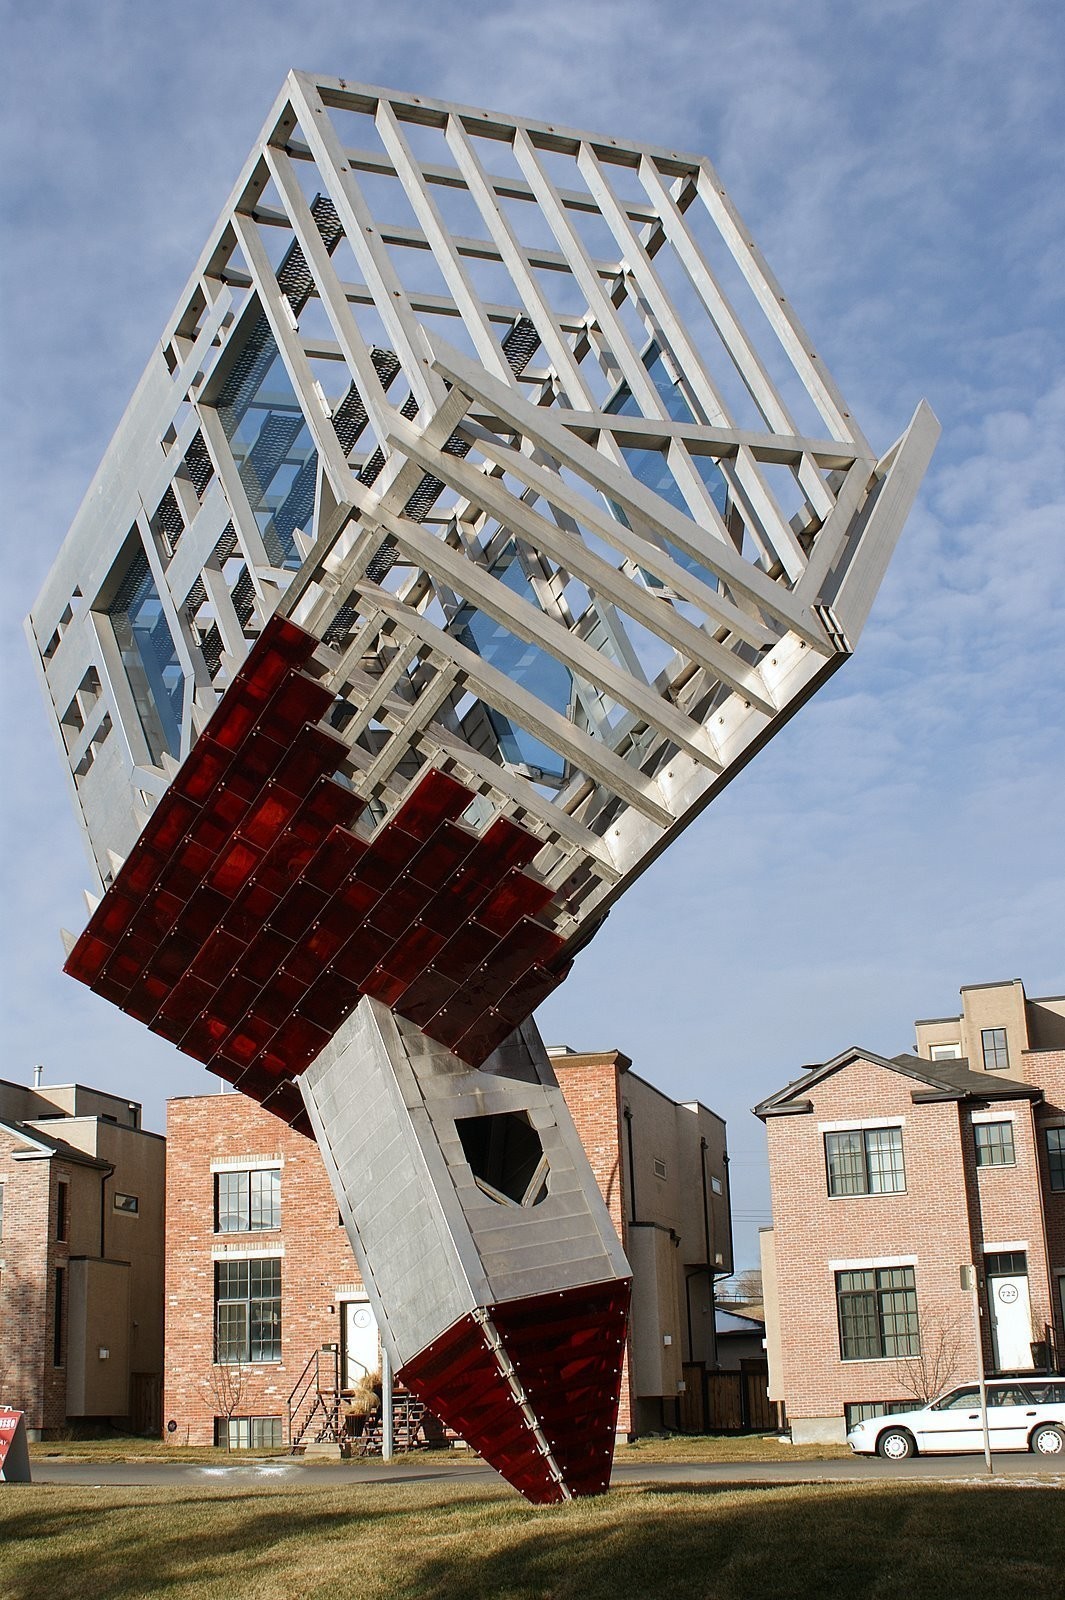 Denis Oppenheim  Device To Root Out Evil, 1997  Galvanized steel, perforated metal, Venetian glass  Vancouver, Canada